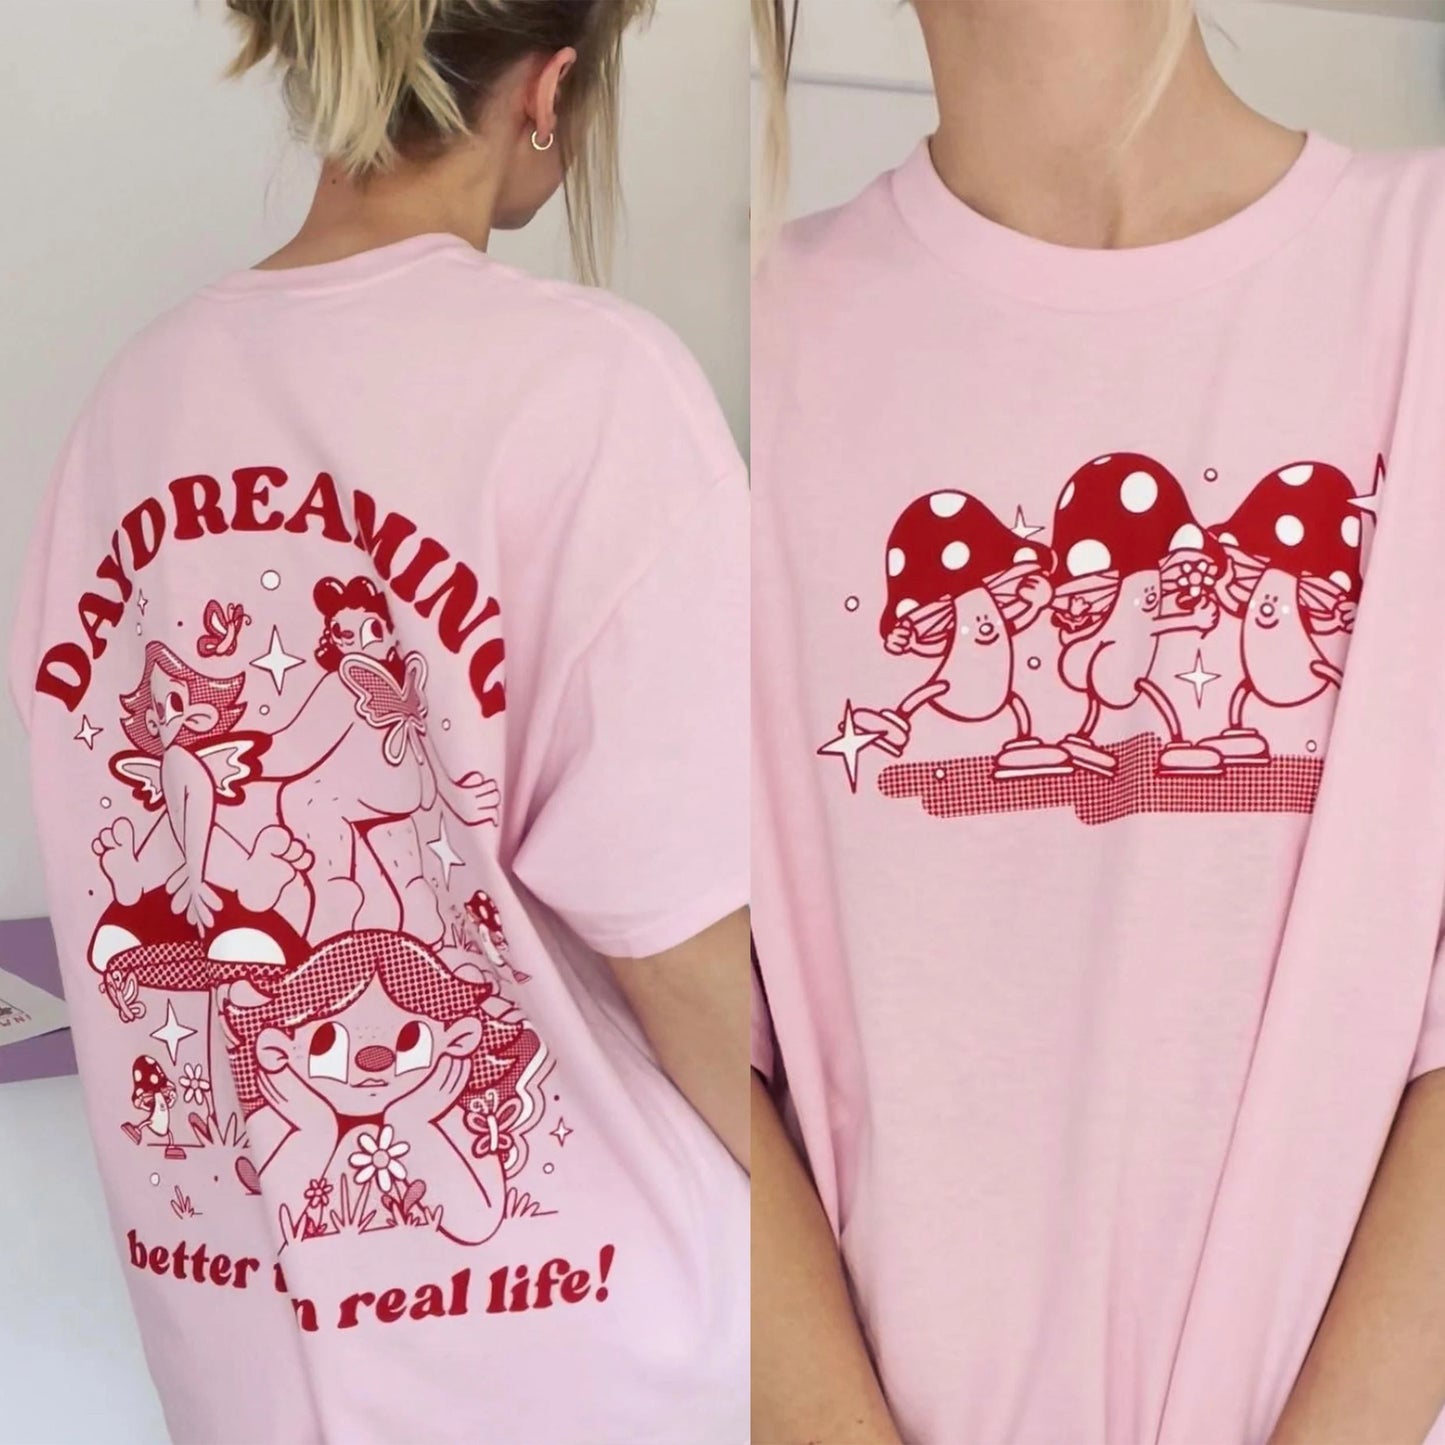 Daydreaming organic cottonT-shirt (X2 colours available)